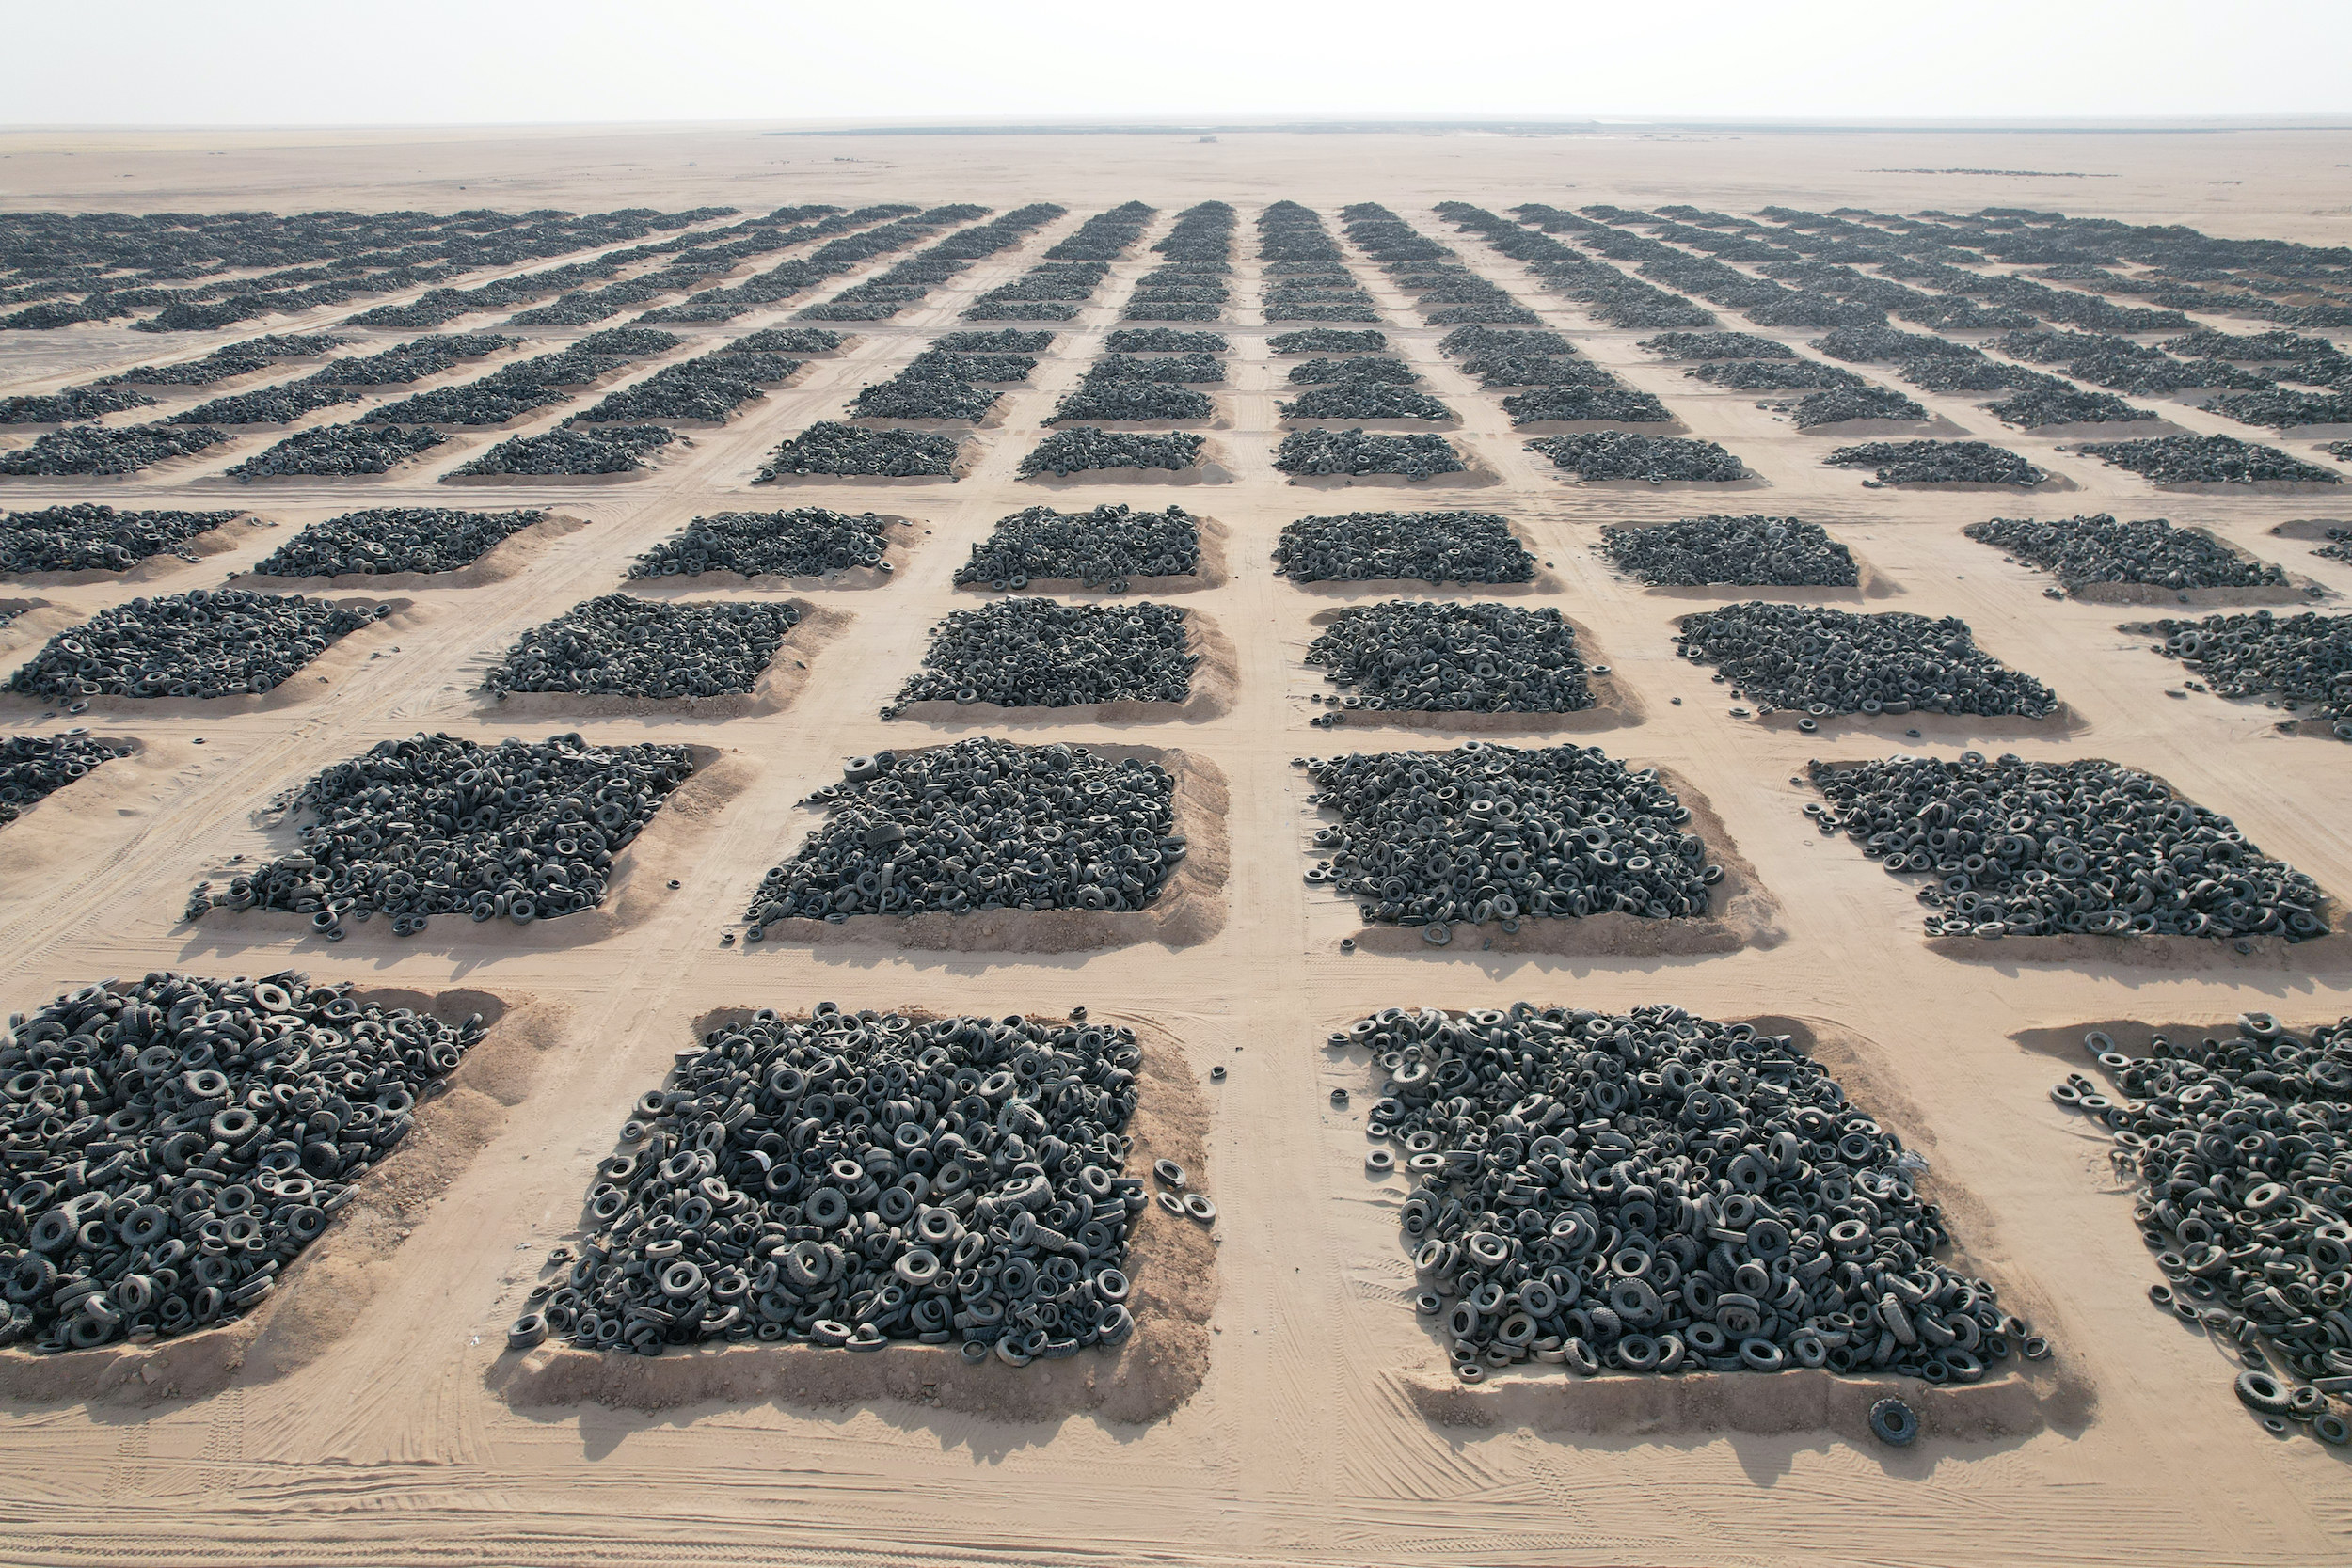 Thousands of tires sit in piles of sand in a remote area of the Middle East